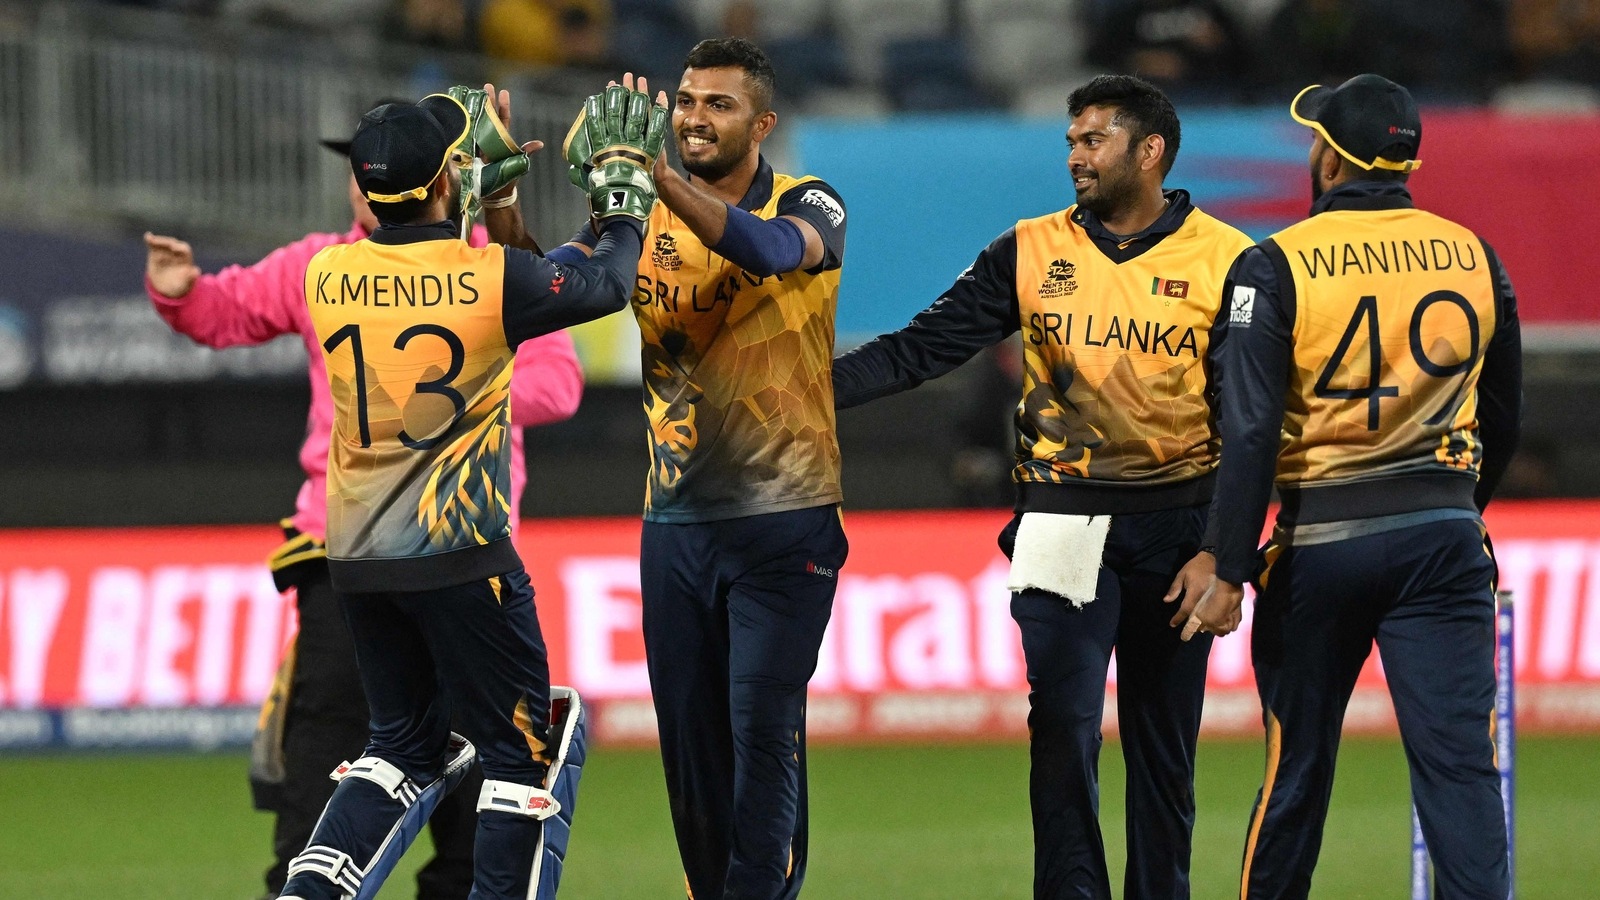 asia-cup-title-is-history-need-to-get-into-super-12s-of-t20-world-cup-sri-lanka-captain-dasun-shanaka